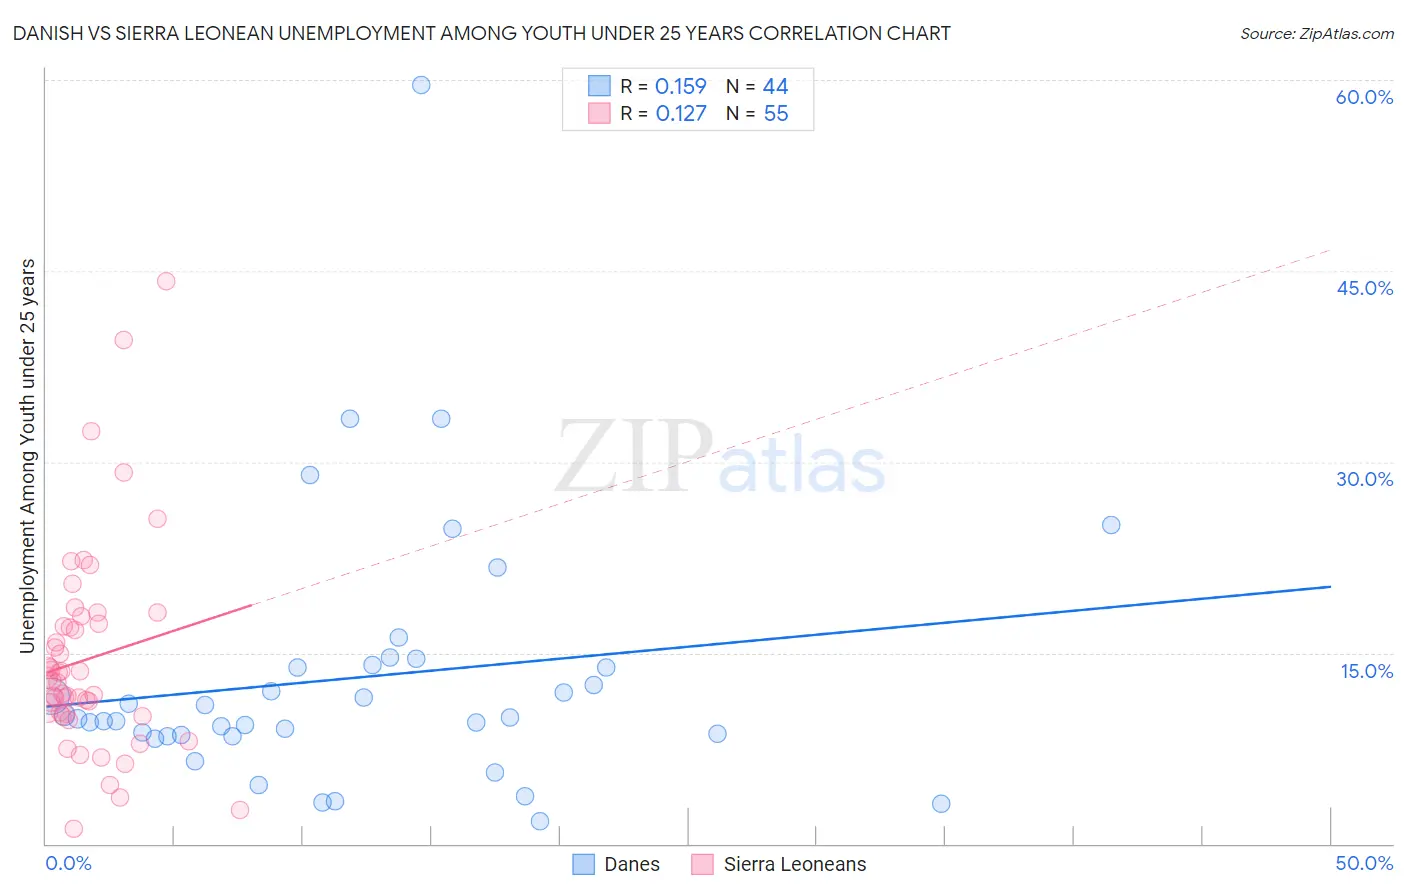 Danish vs Sierra Leonean Unemployment Among Youth under 25 years